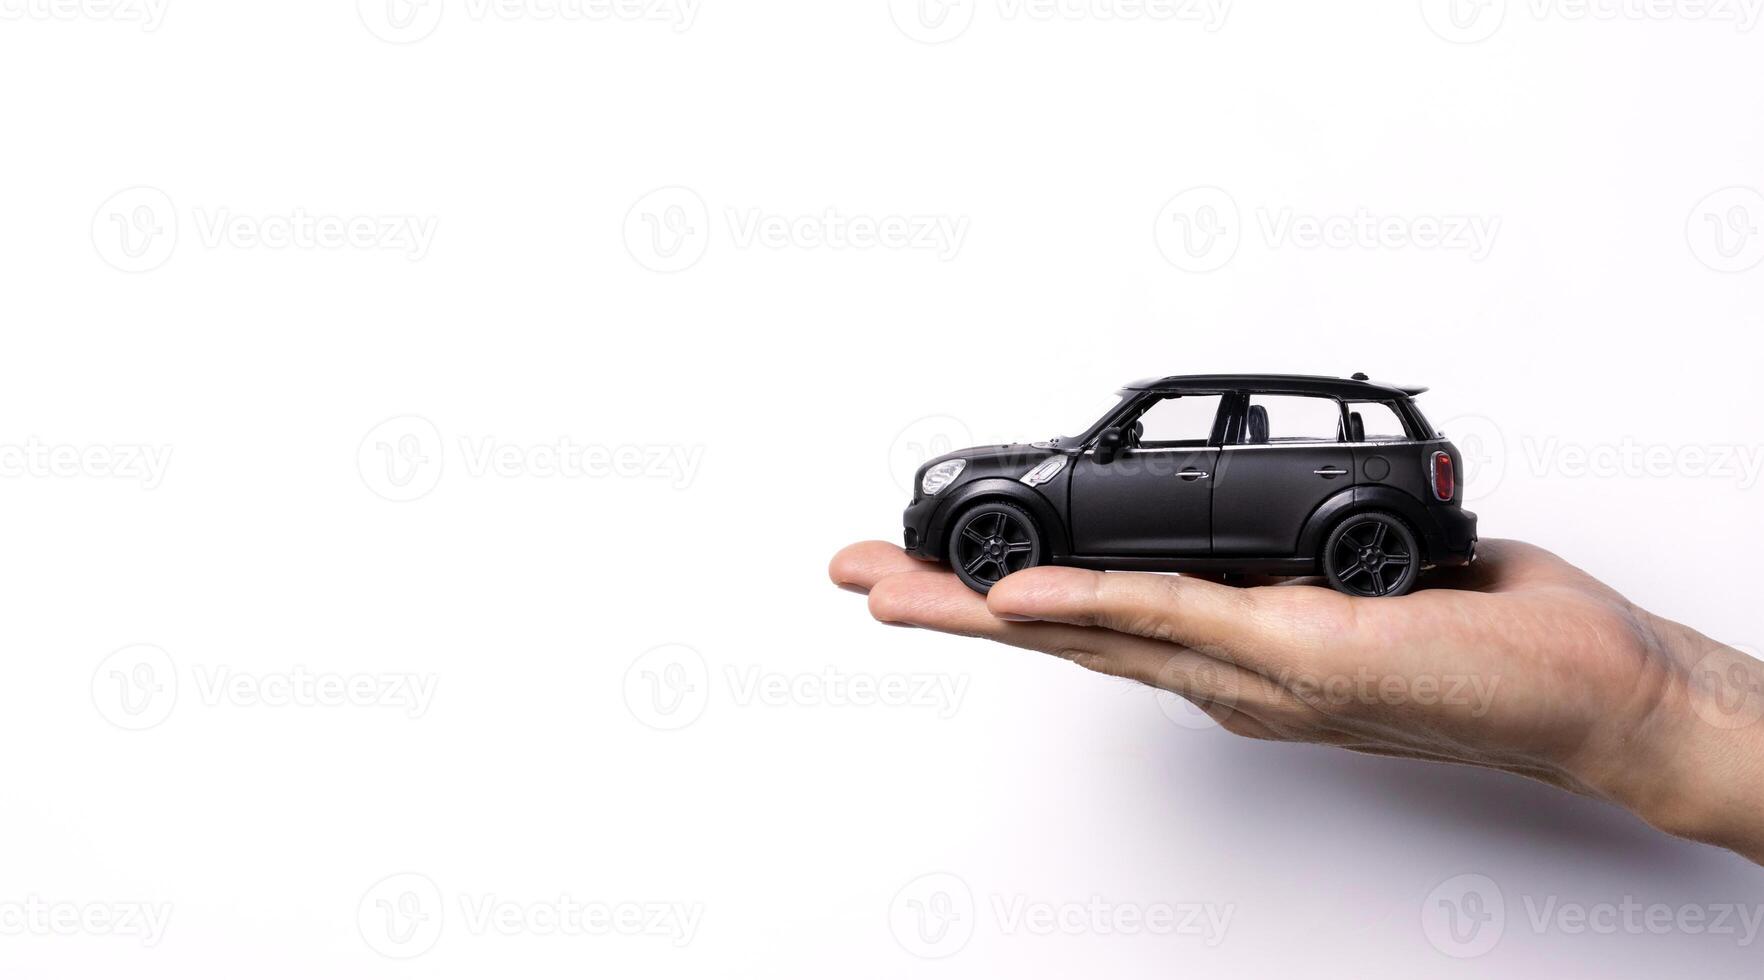 Hand holding a toy car isolated on white background. After some edits. photo